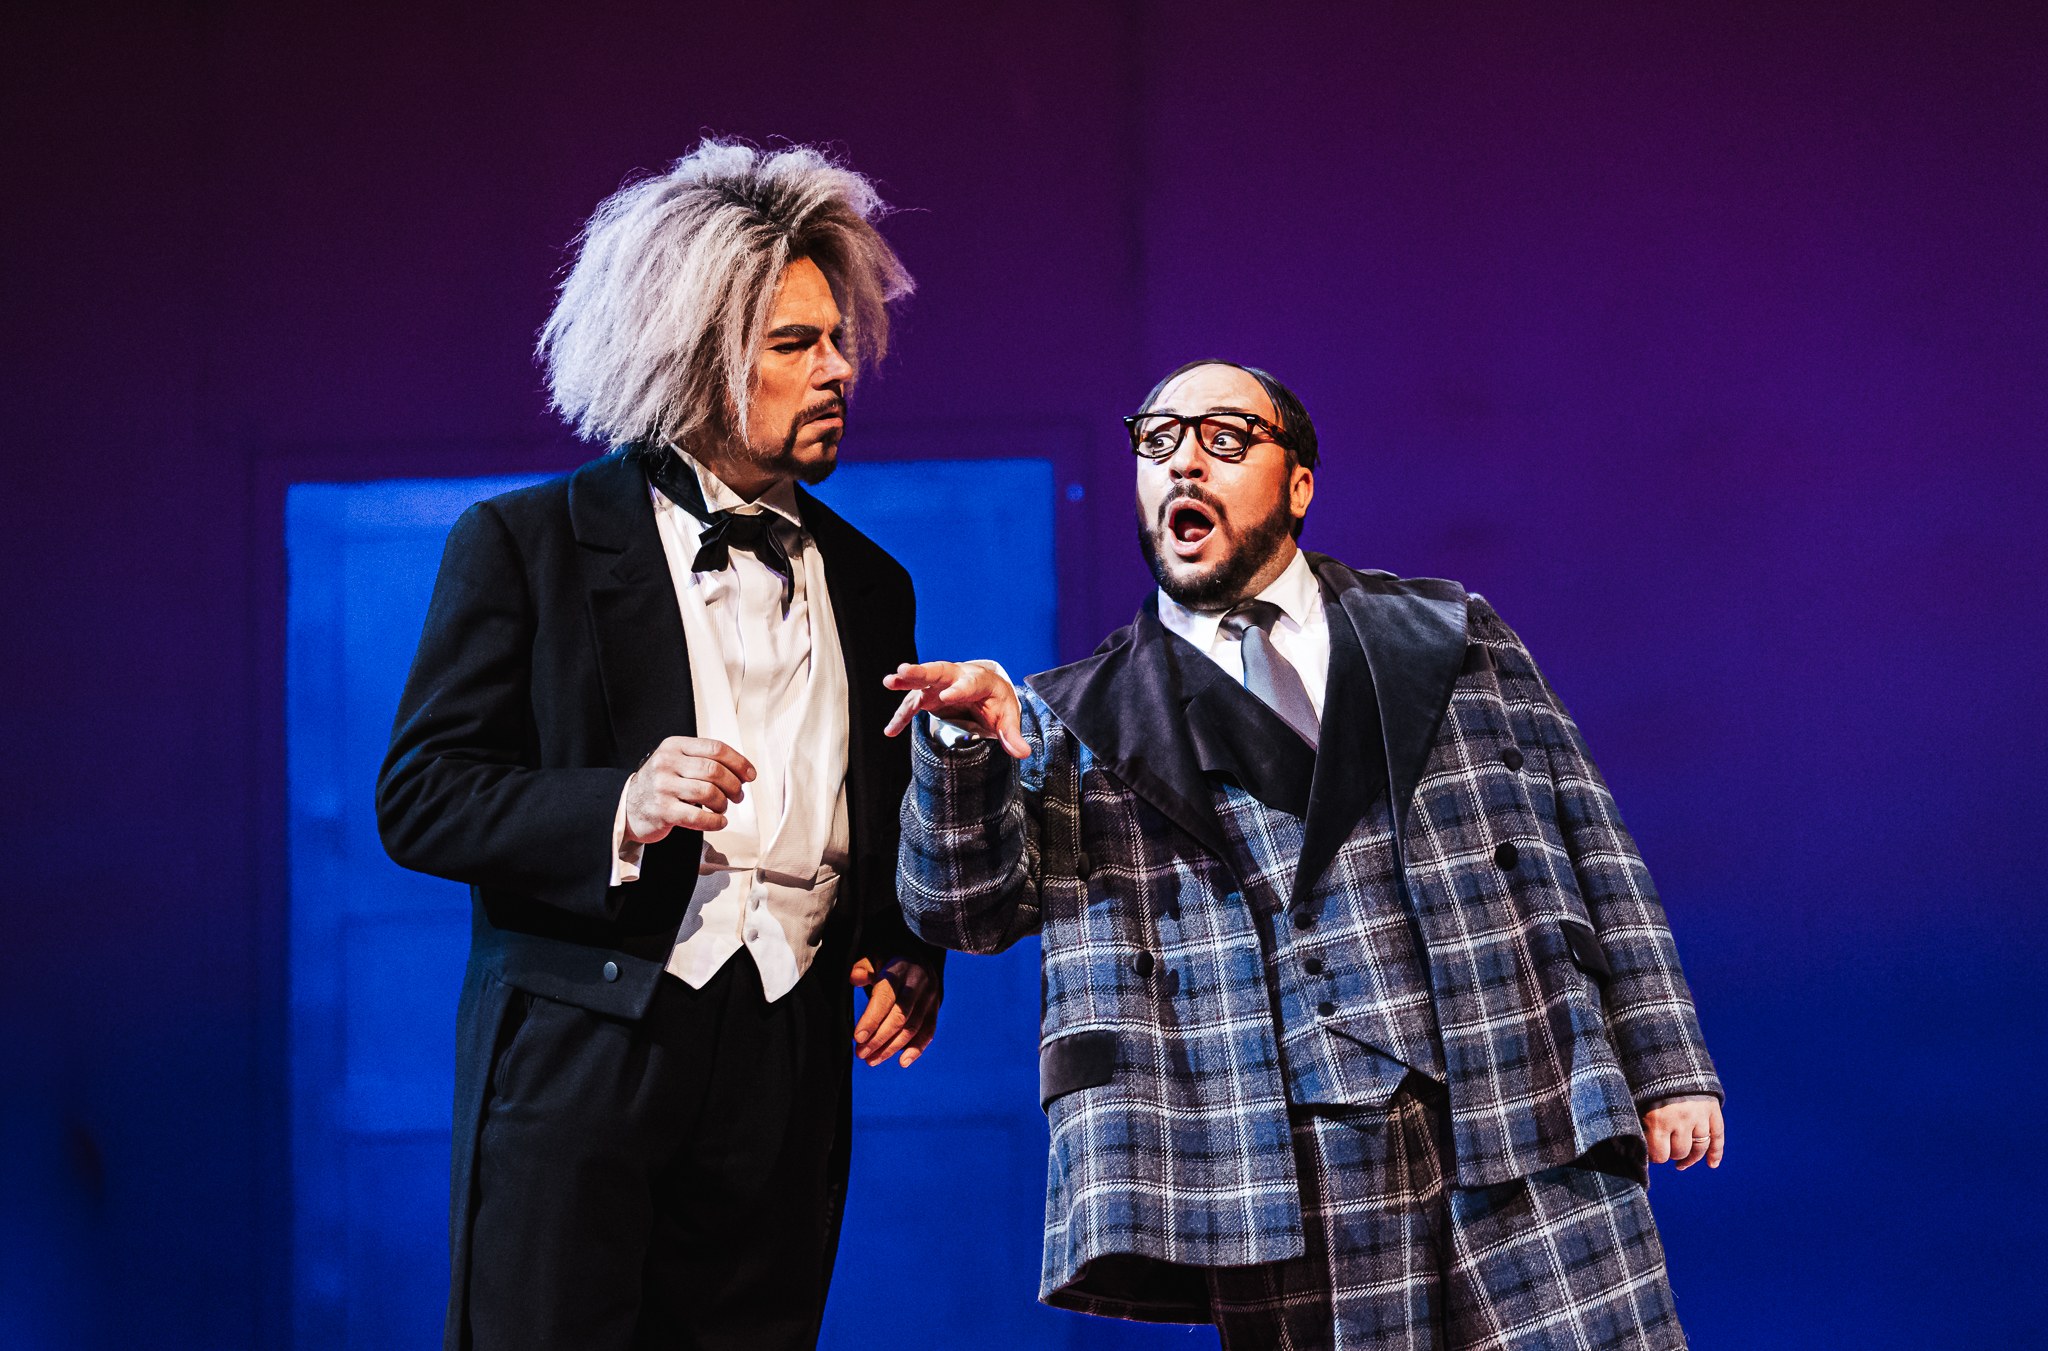 THE BARBER OF SEVILLE 2023, PETRI LINDROOS & MARCO FILIPPO ROMANO